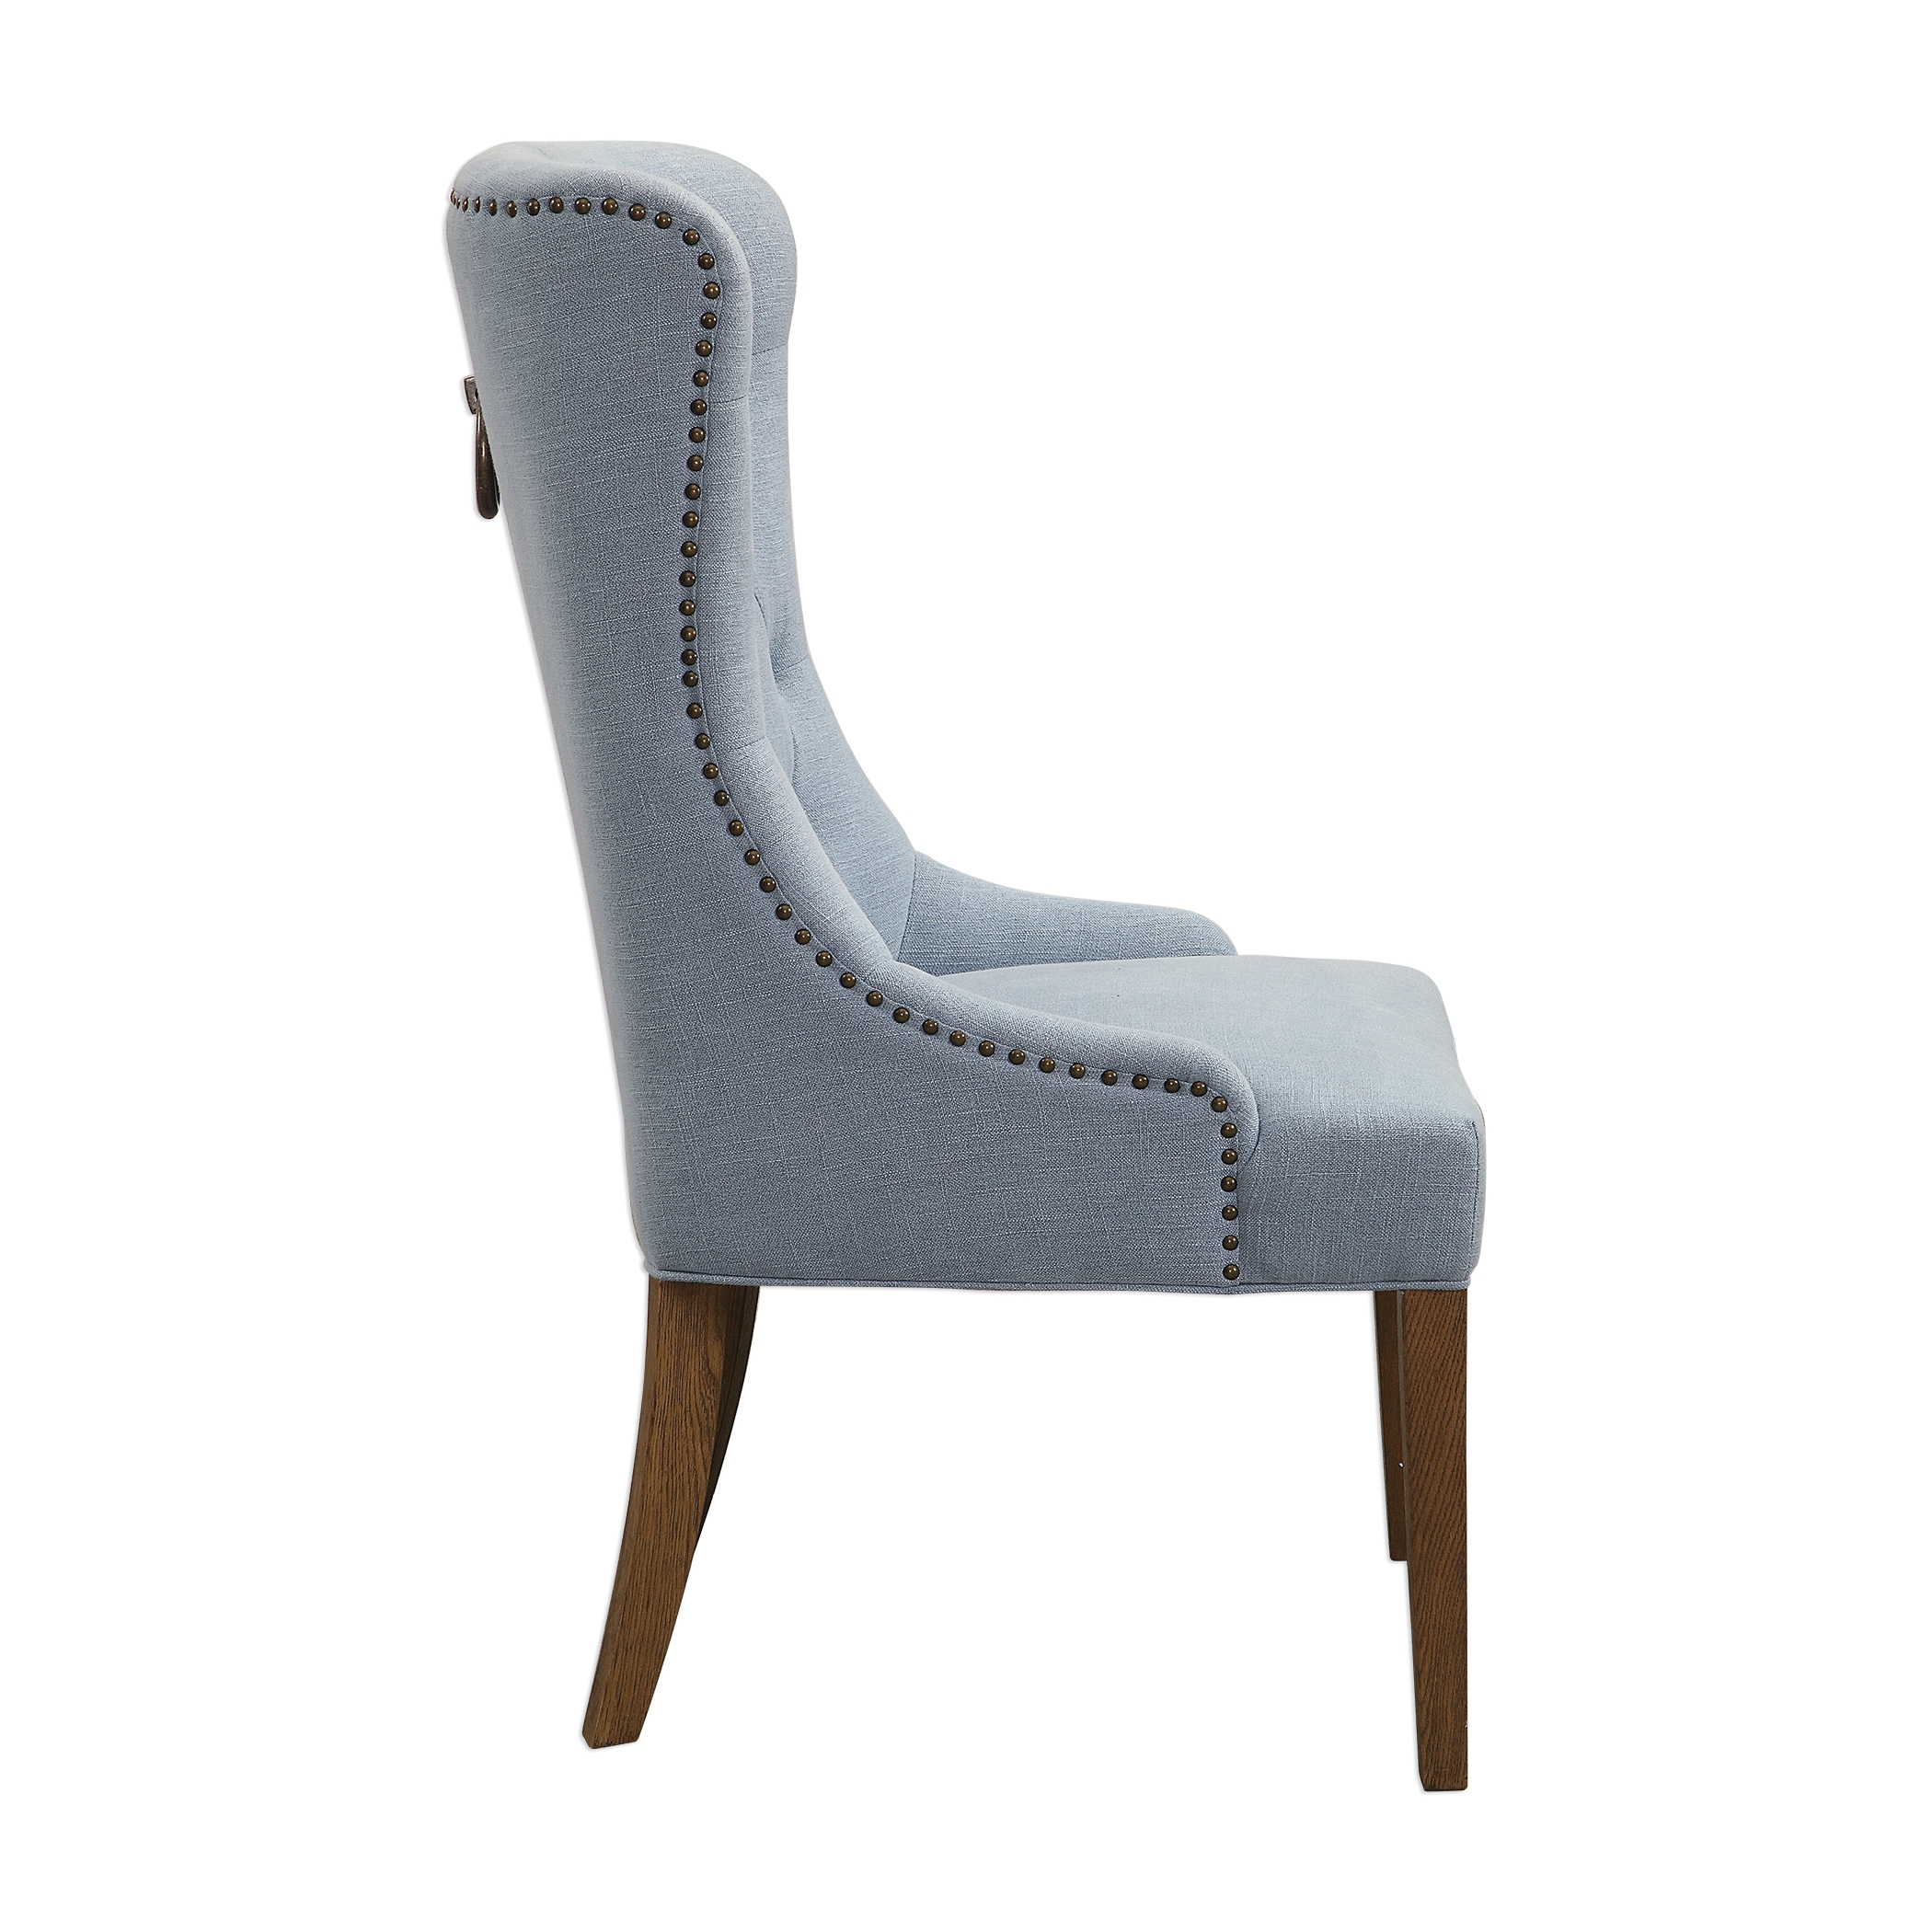 Rioni Tufted Wing Chair - Image 4